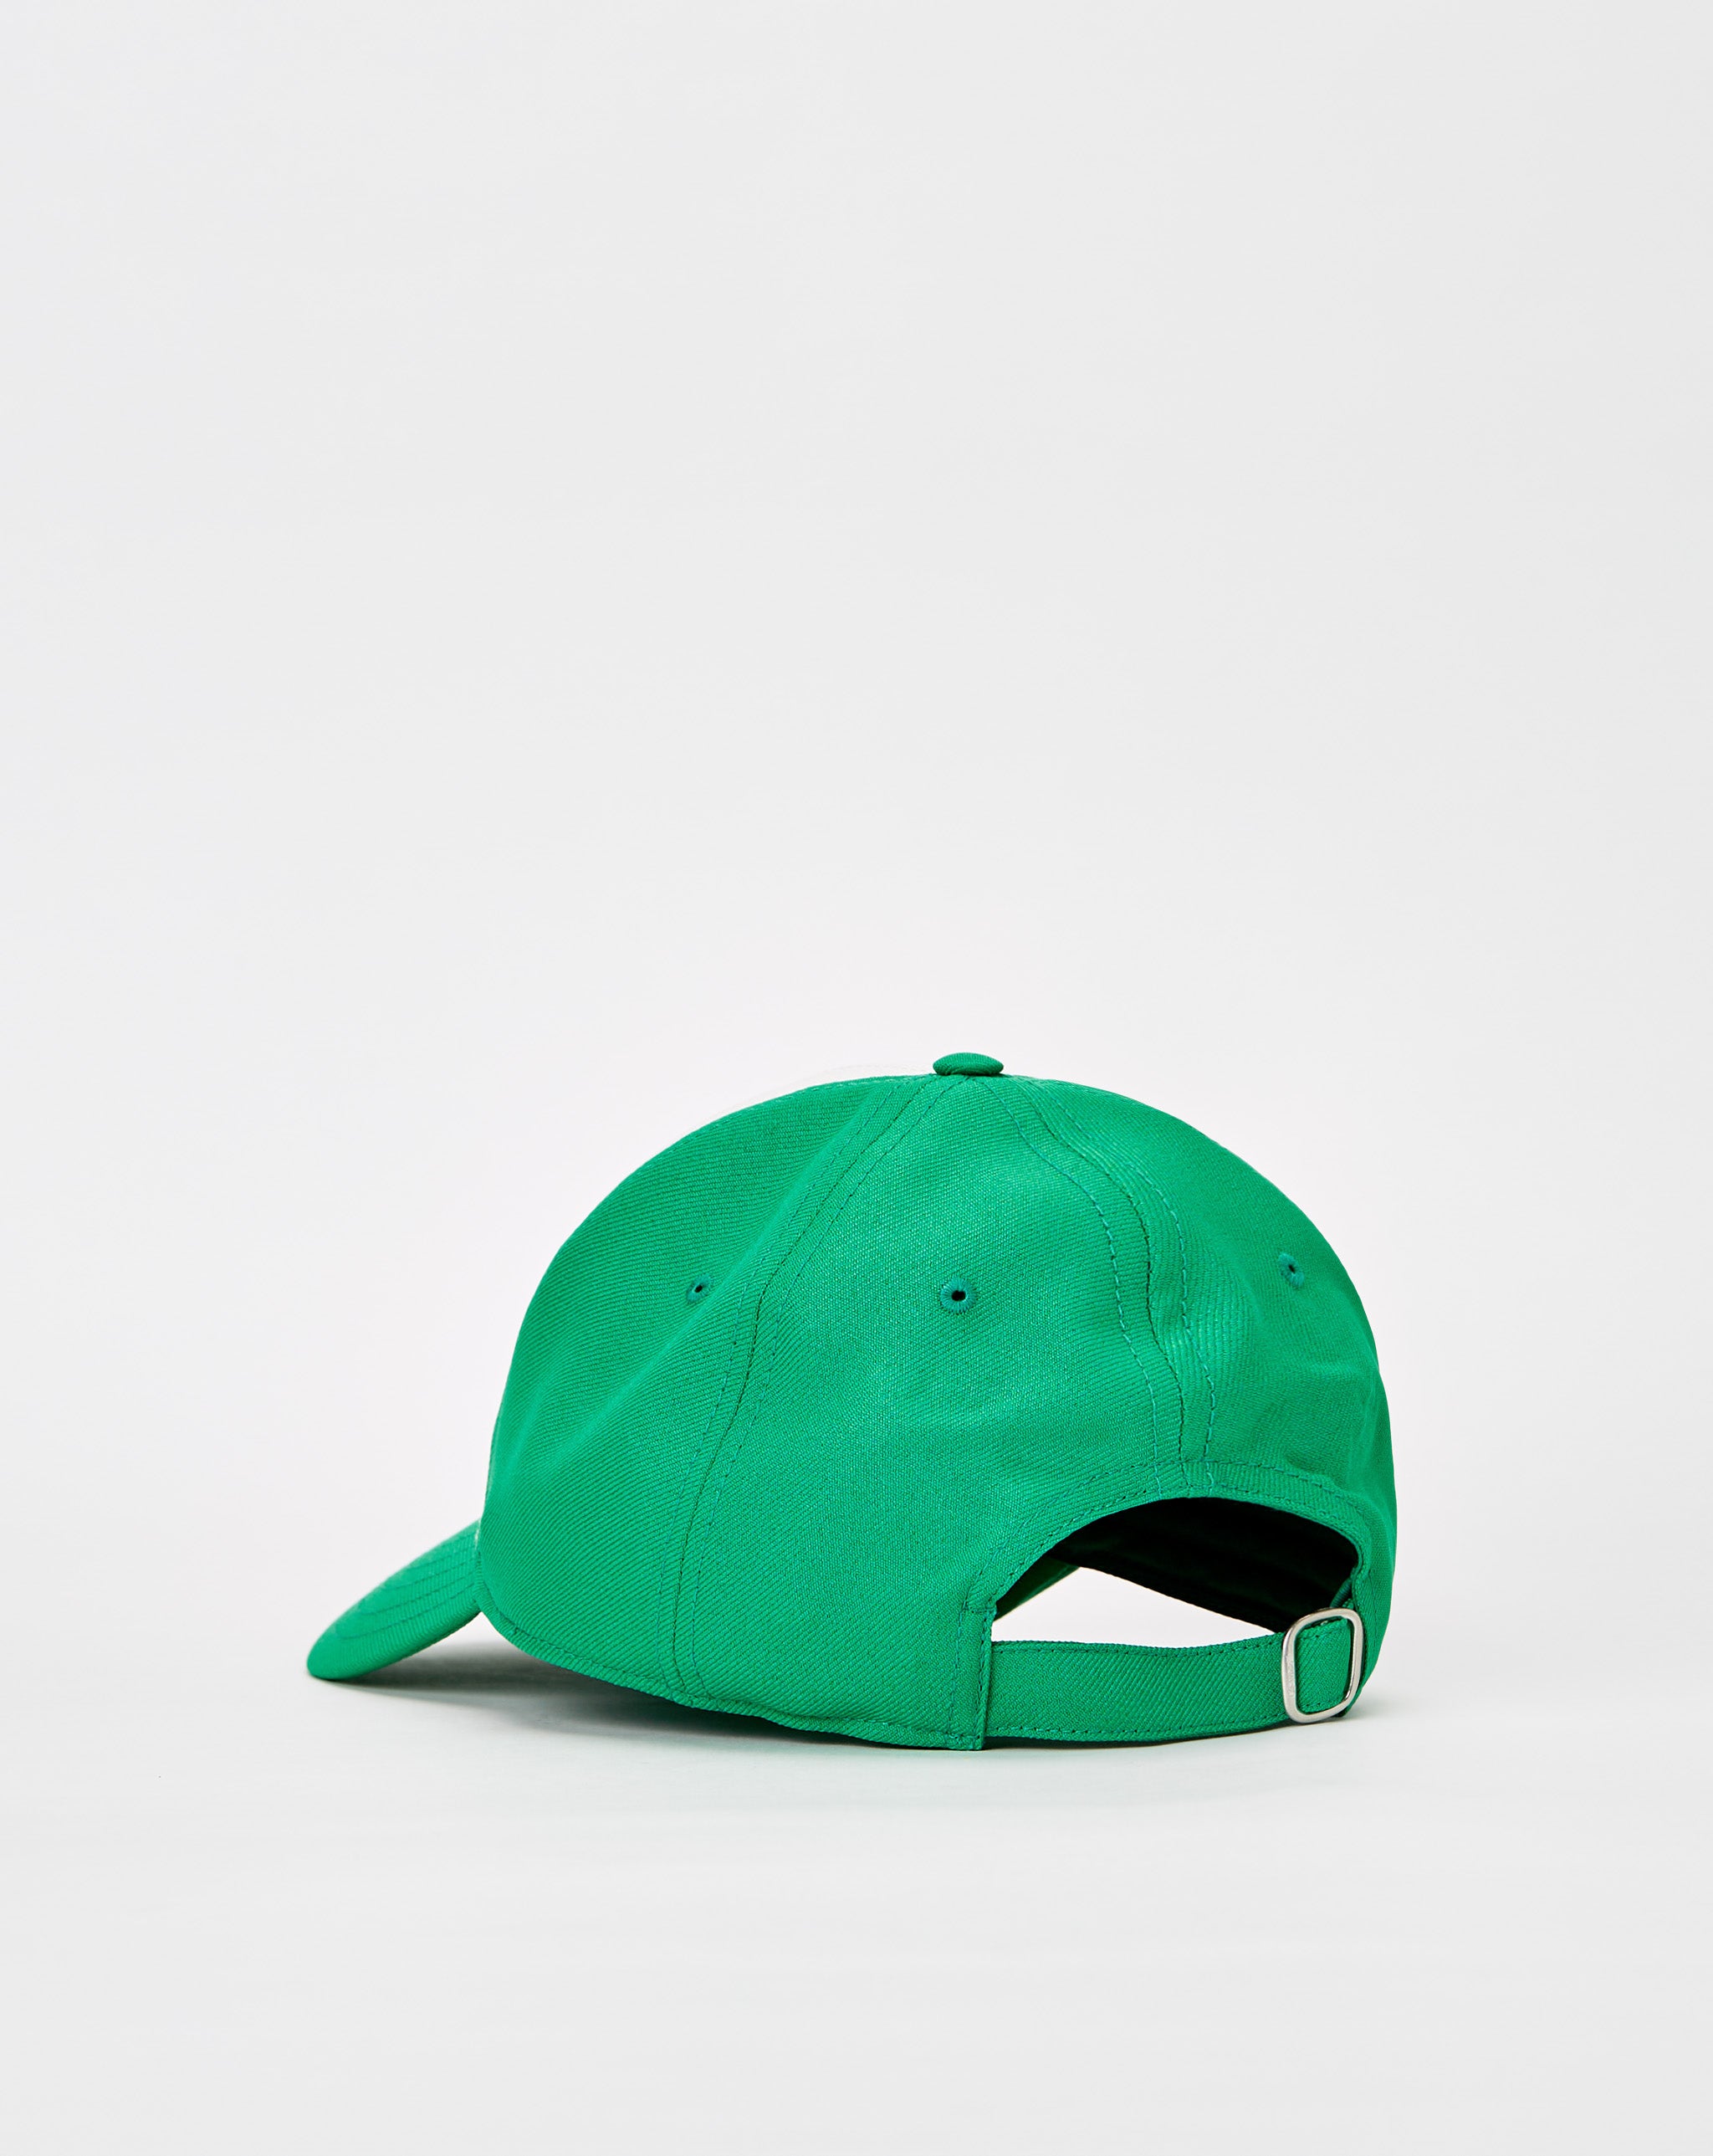 Off-White Drill Logo Bookish Baseball Cap - Rule of Next Accessories